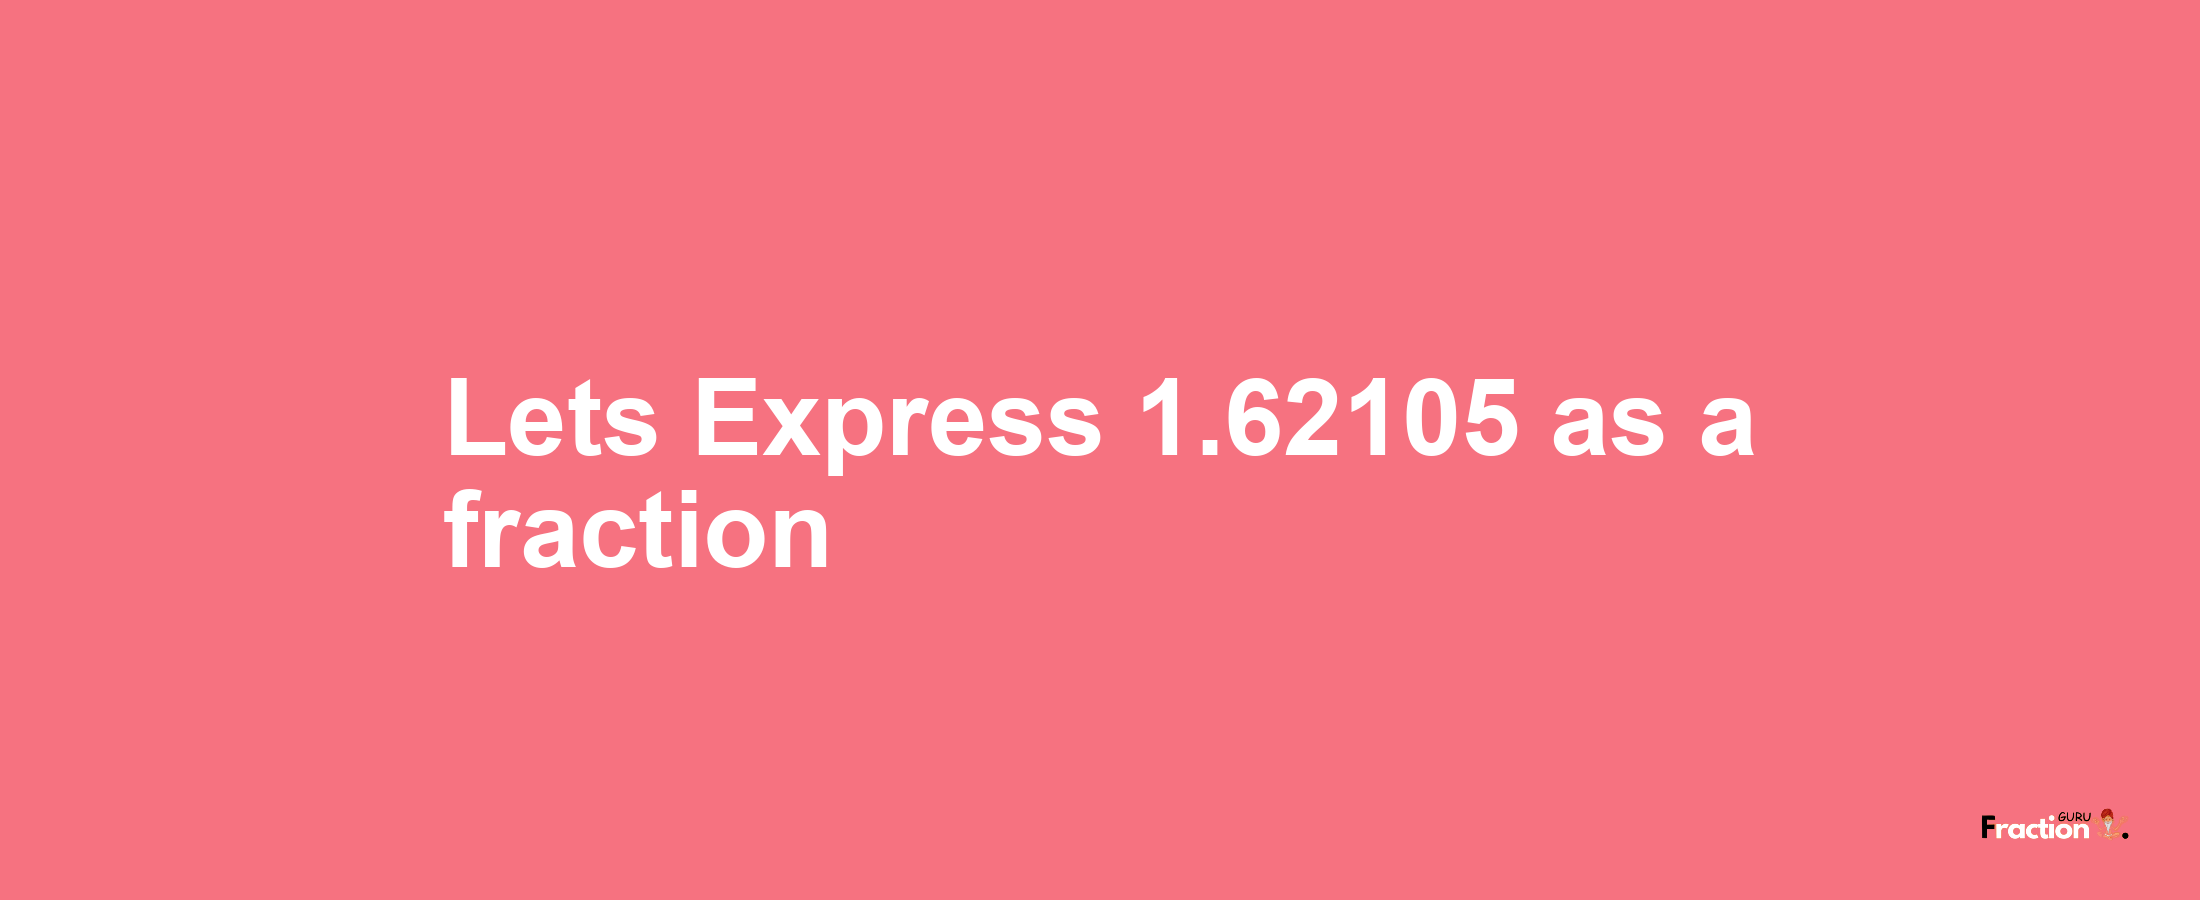 Lets Express 1.62105 as afraction